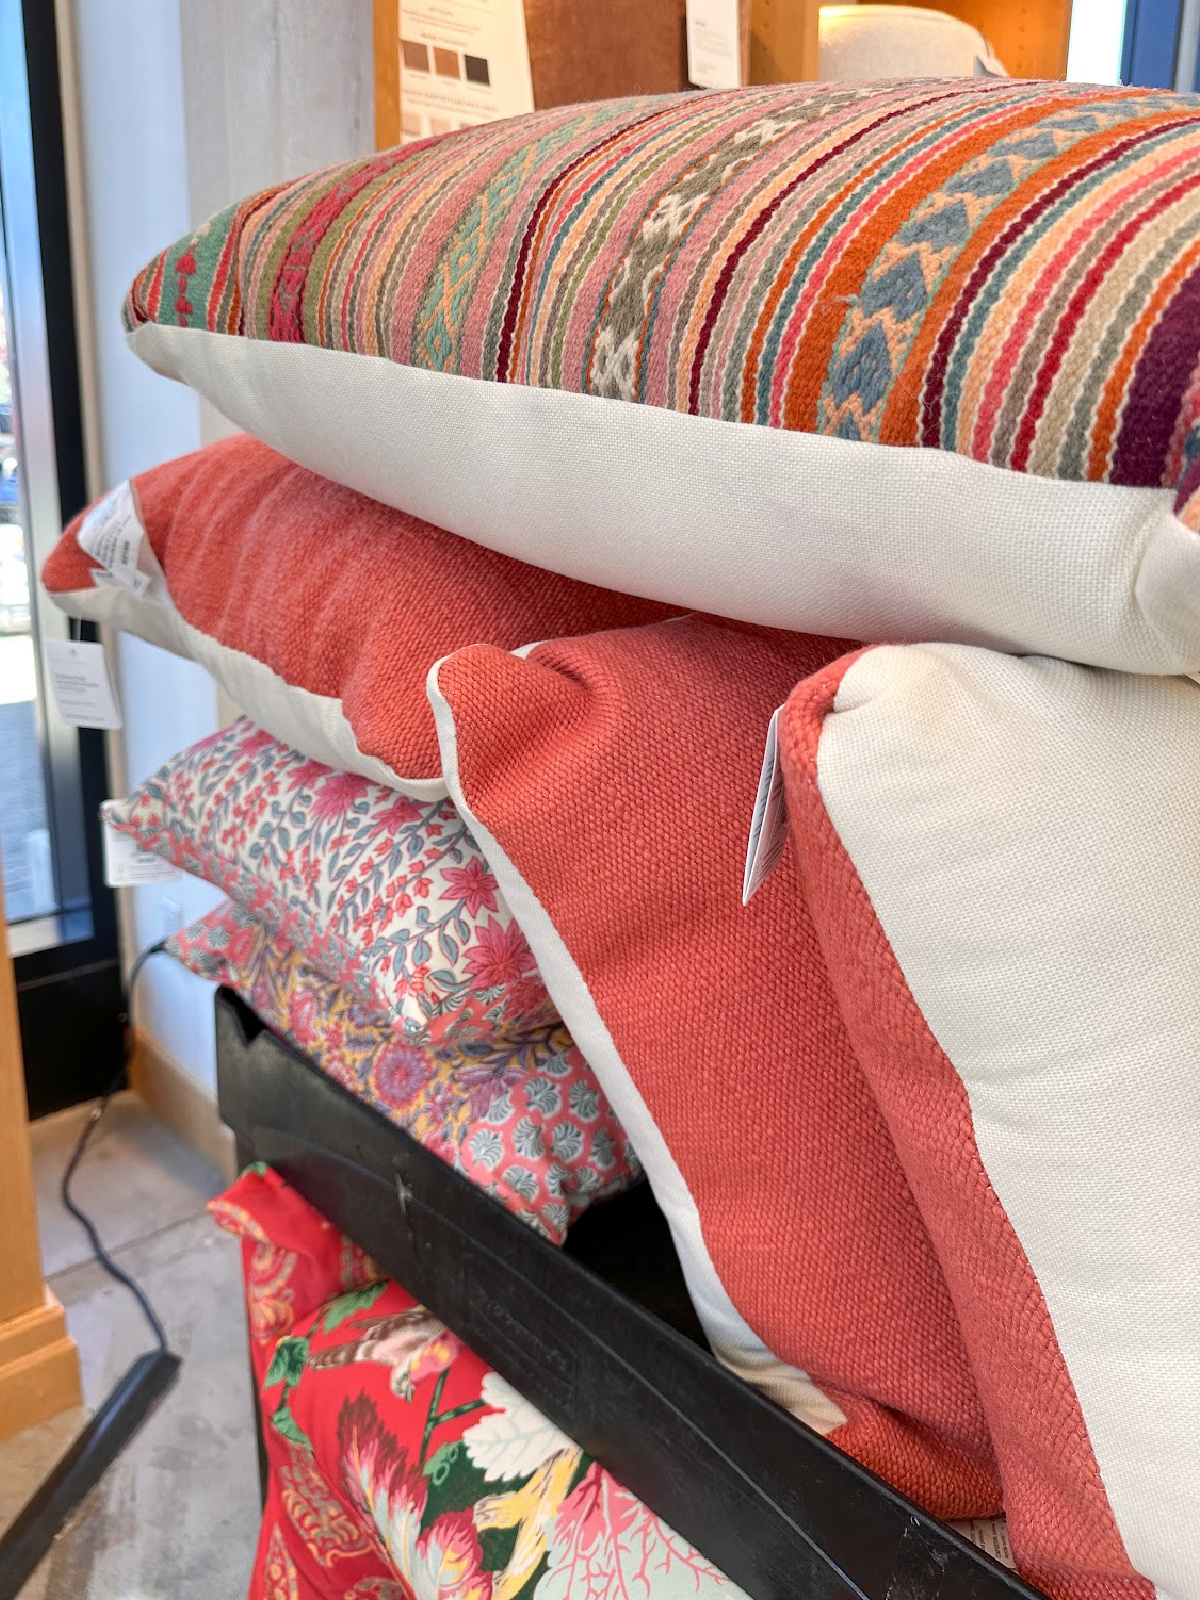 Coral and floral outdoor pillows on rack at Pottery Barn.